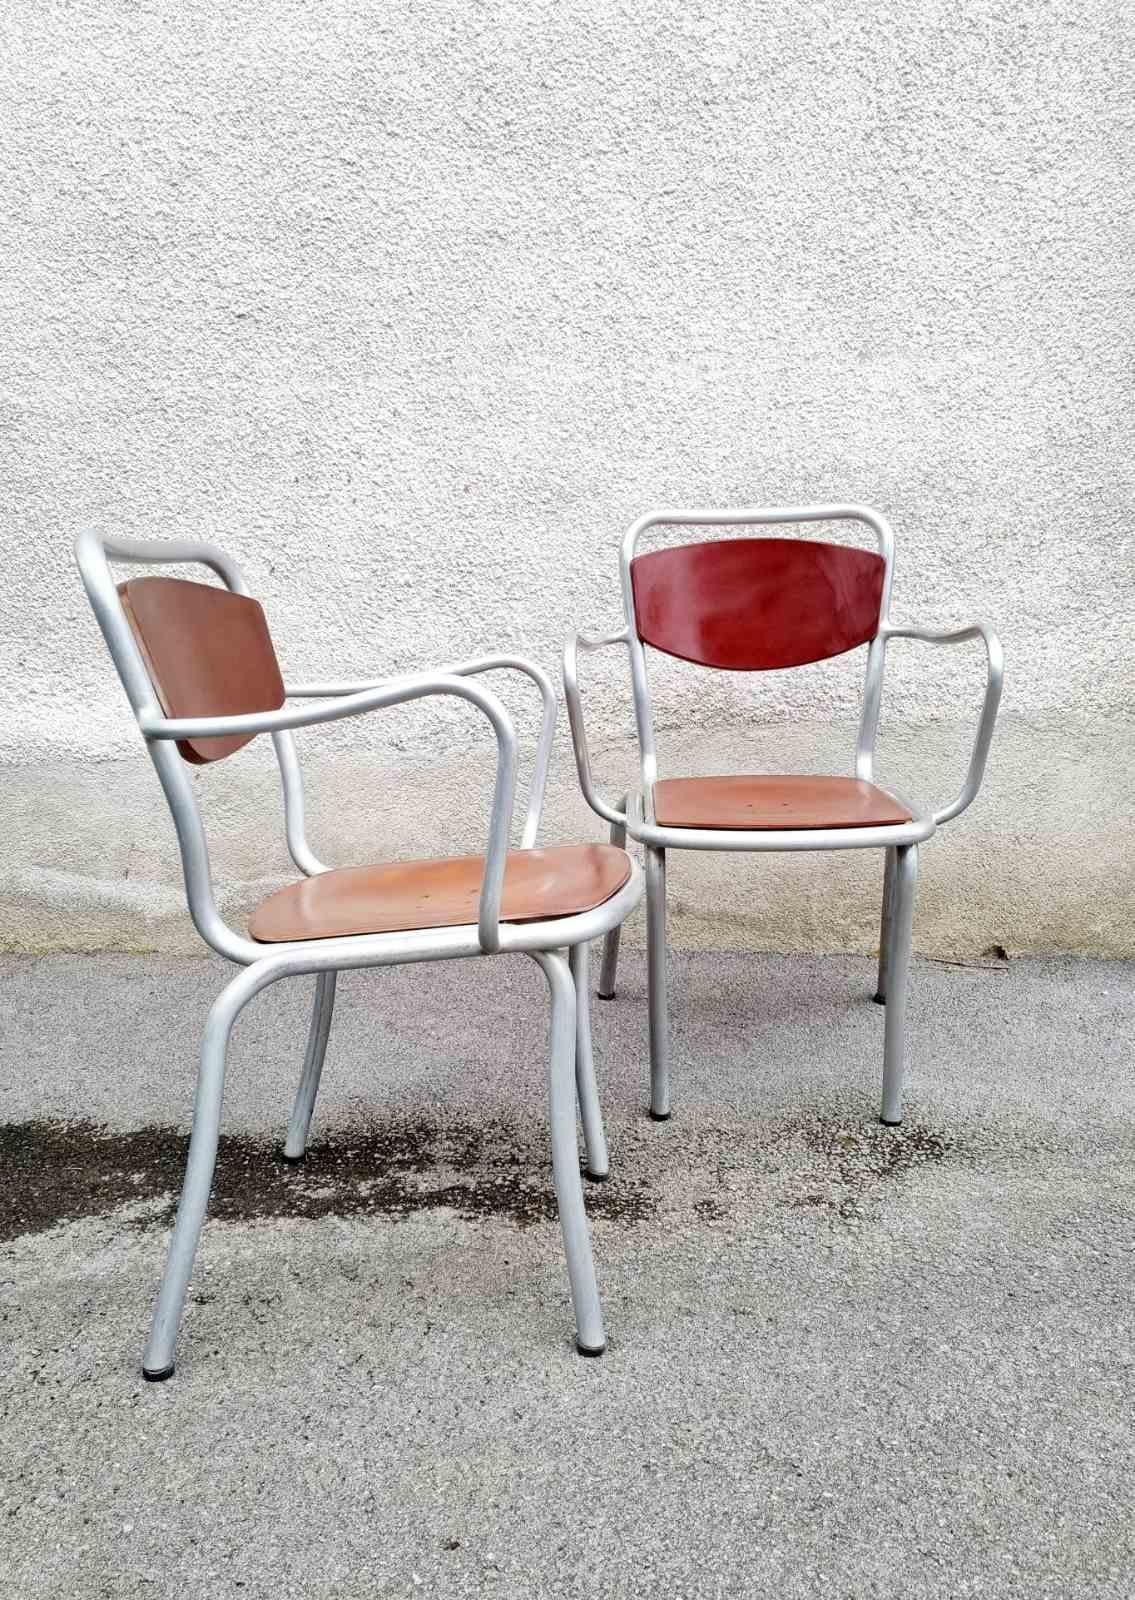 Rare pair of model B 236 chairs designed by Gastone Rinaldi for Rima Italy
They are made in 1951